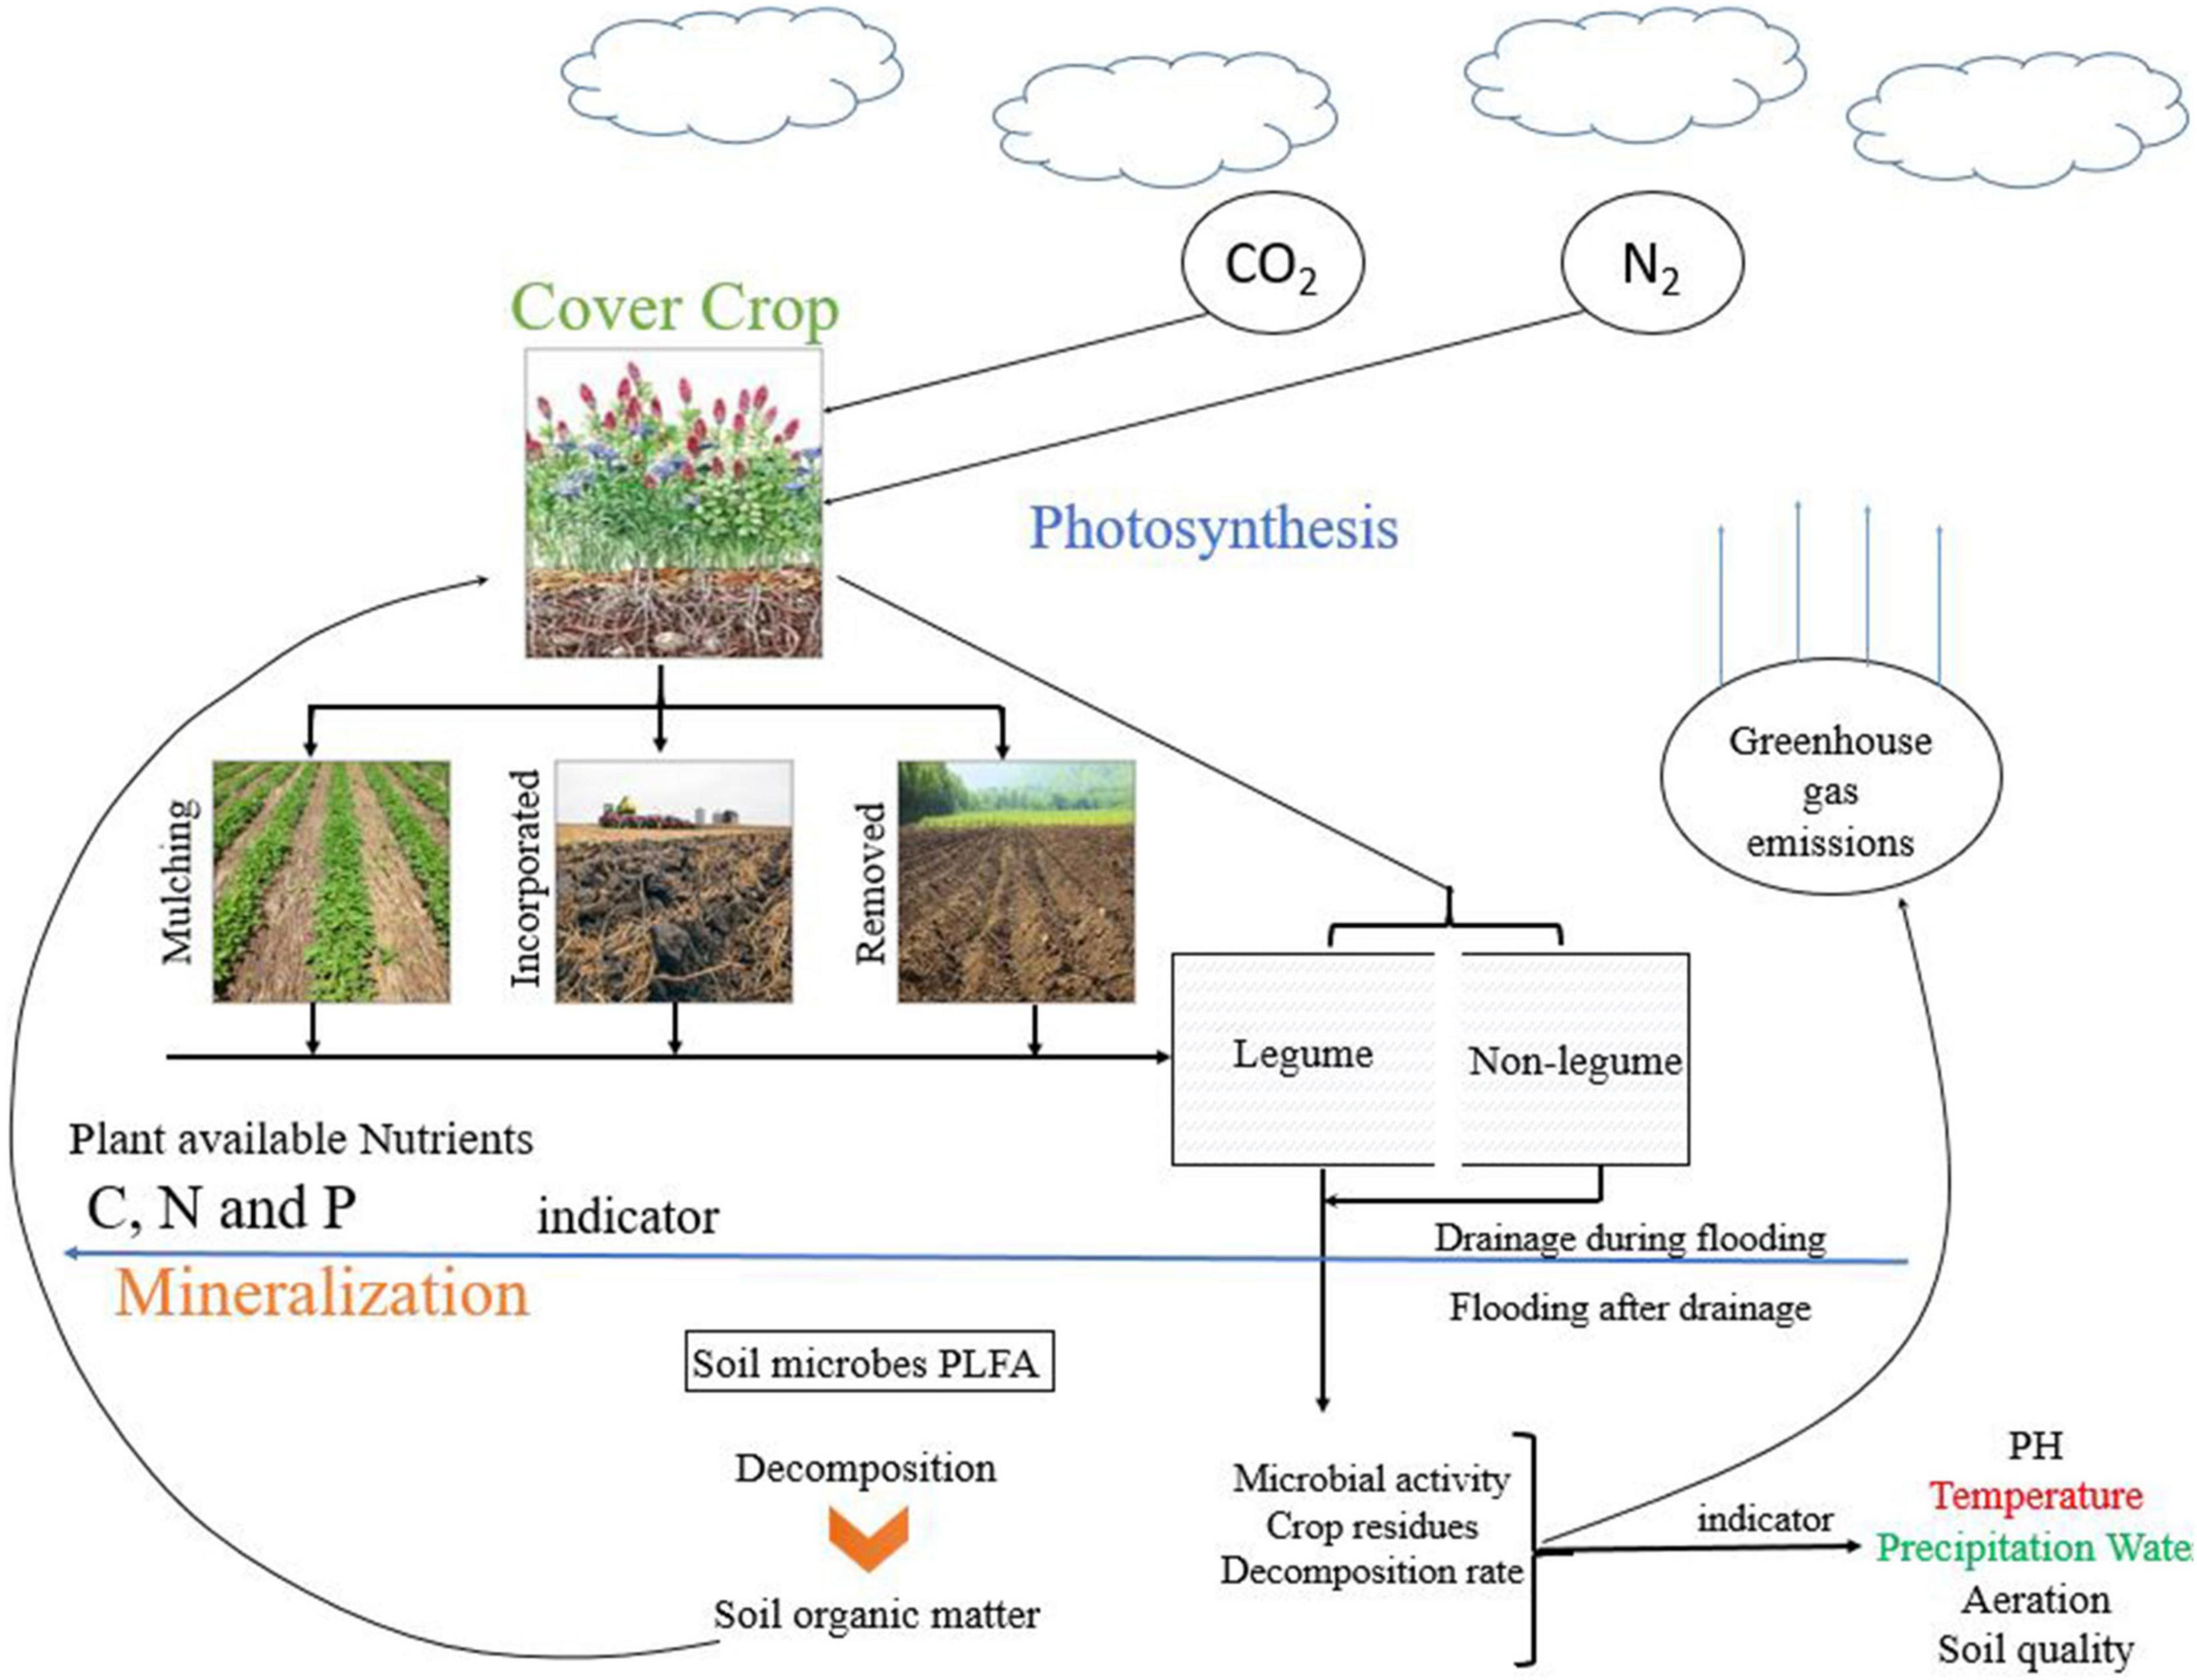 III. The Role of Hens in Soil Carbon Cycling